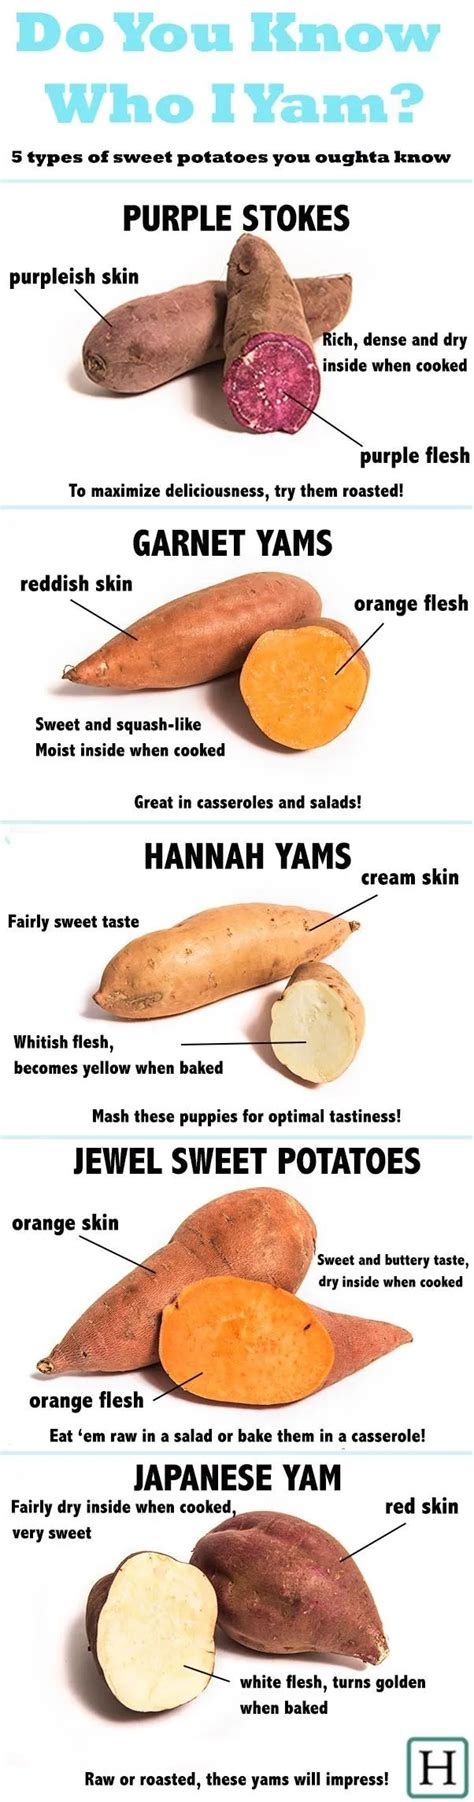 High Fodmap Foods Are Sweet Potatoes Included Planthd